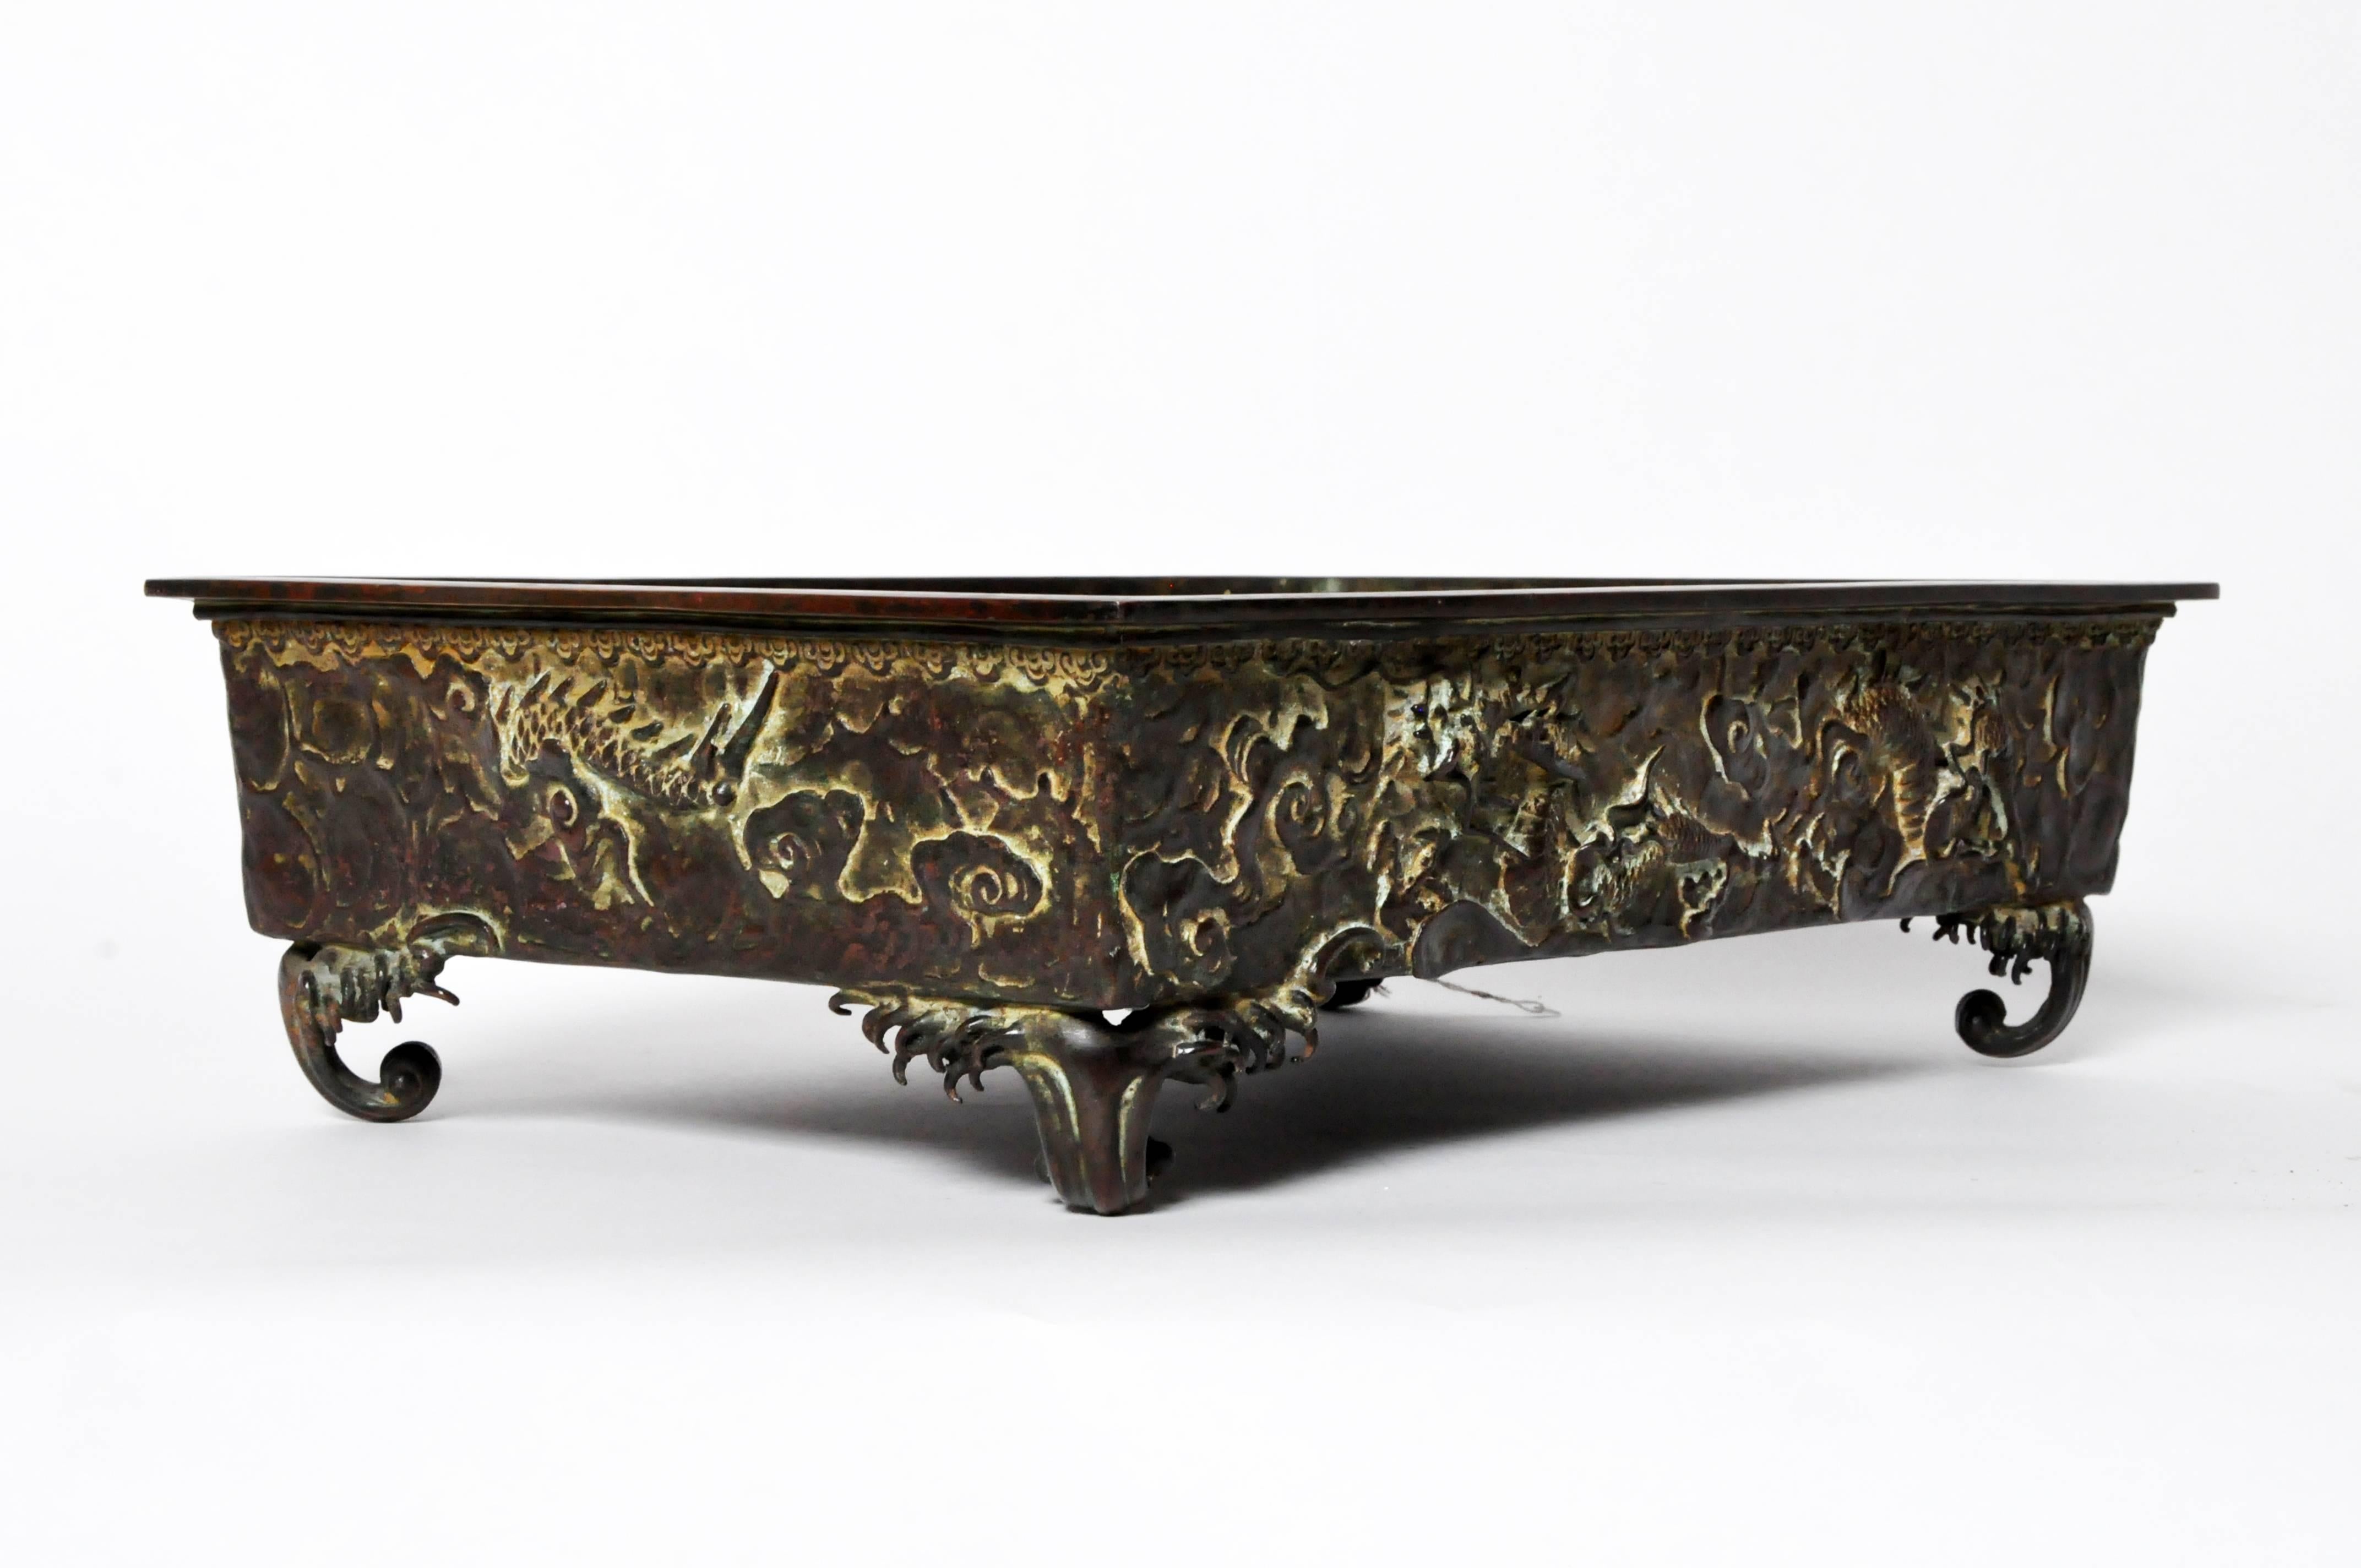 This antique 19th century Japanese bronze rectangular censer decorated with moulded dragons against a patterned cloud form background, standing on four scroll feet. The censer measures approximately 17 3/4